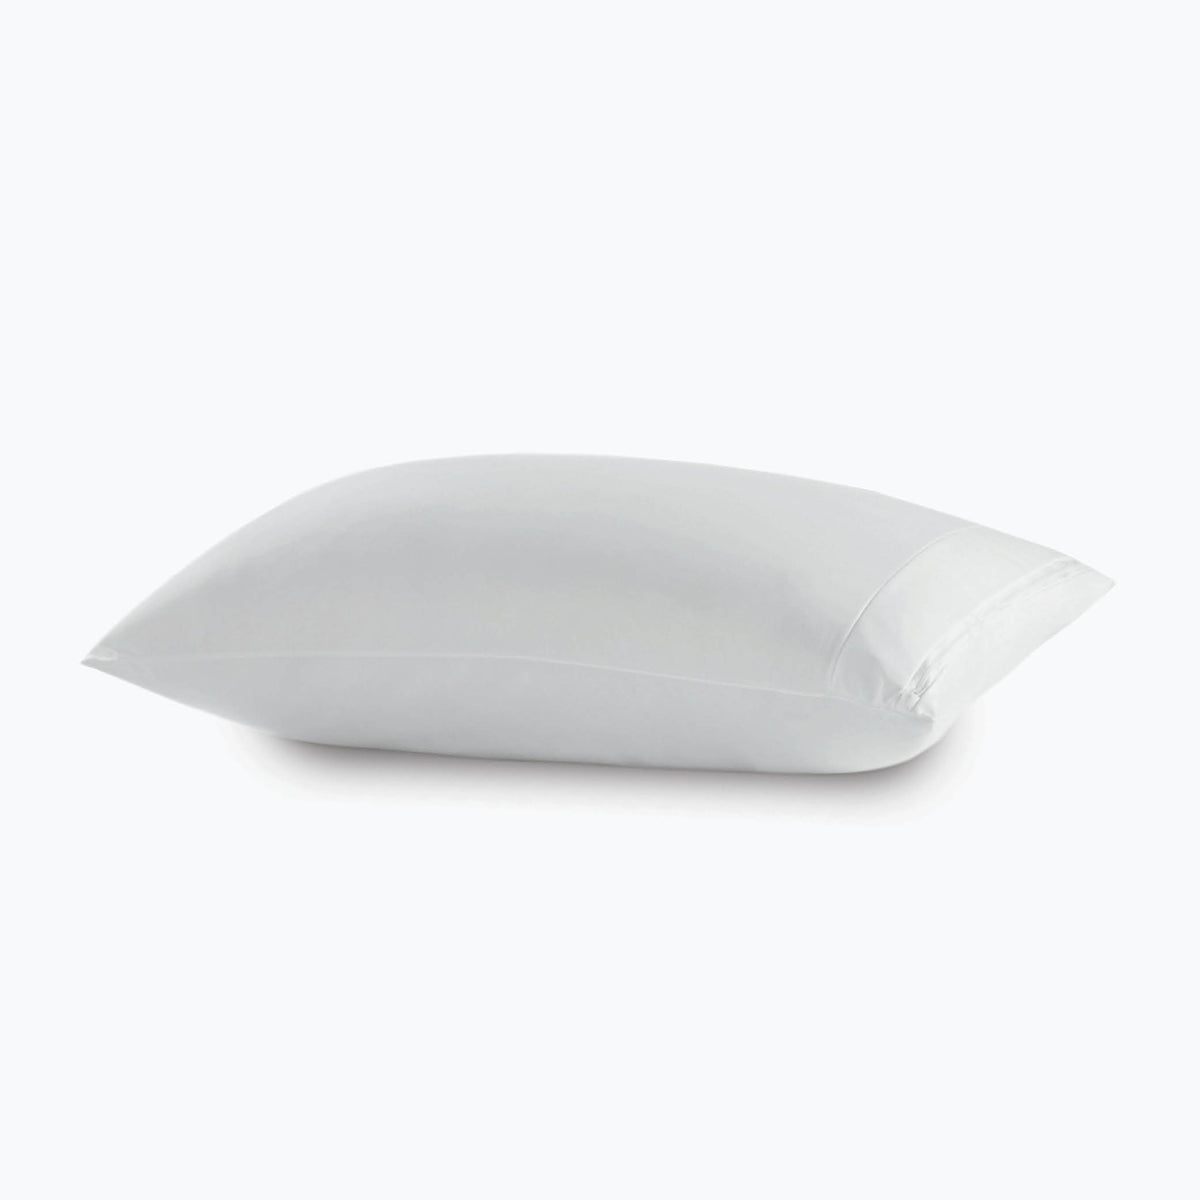 Luxury Resort Hotel Collection Pillow Protector